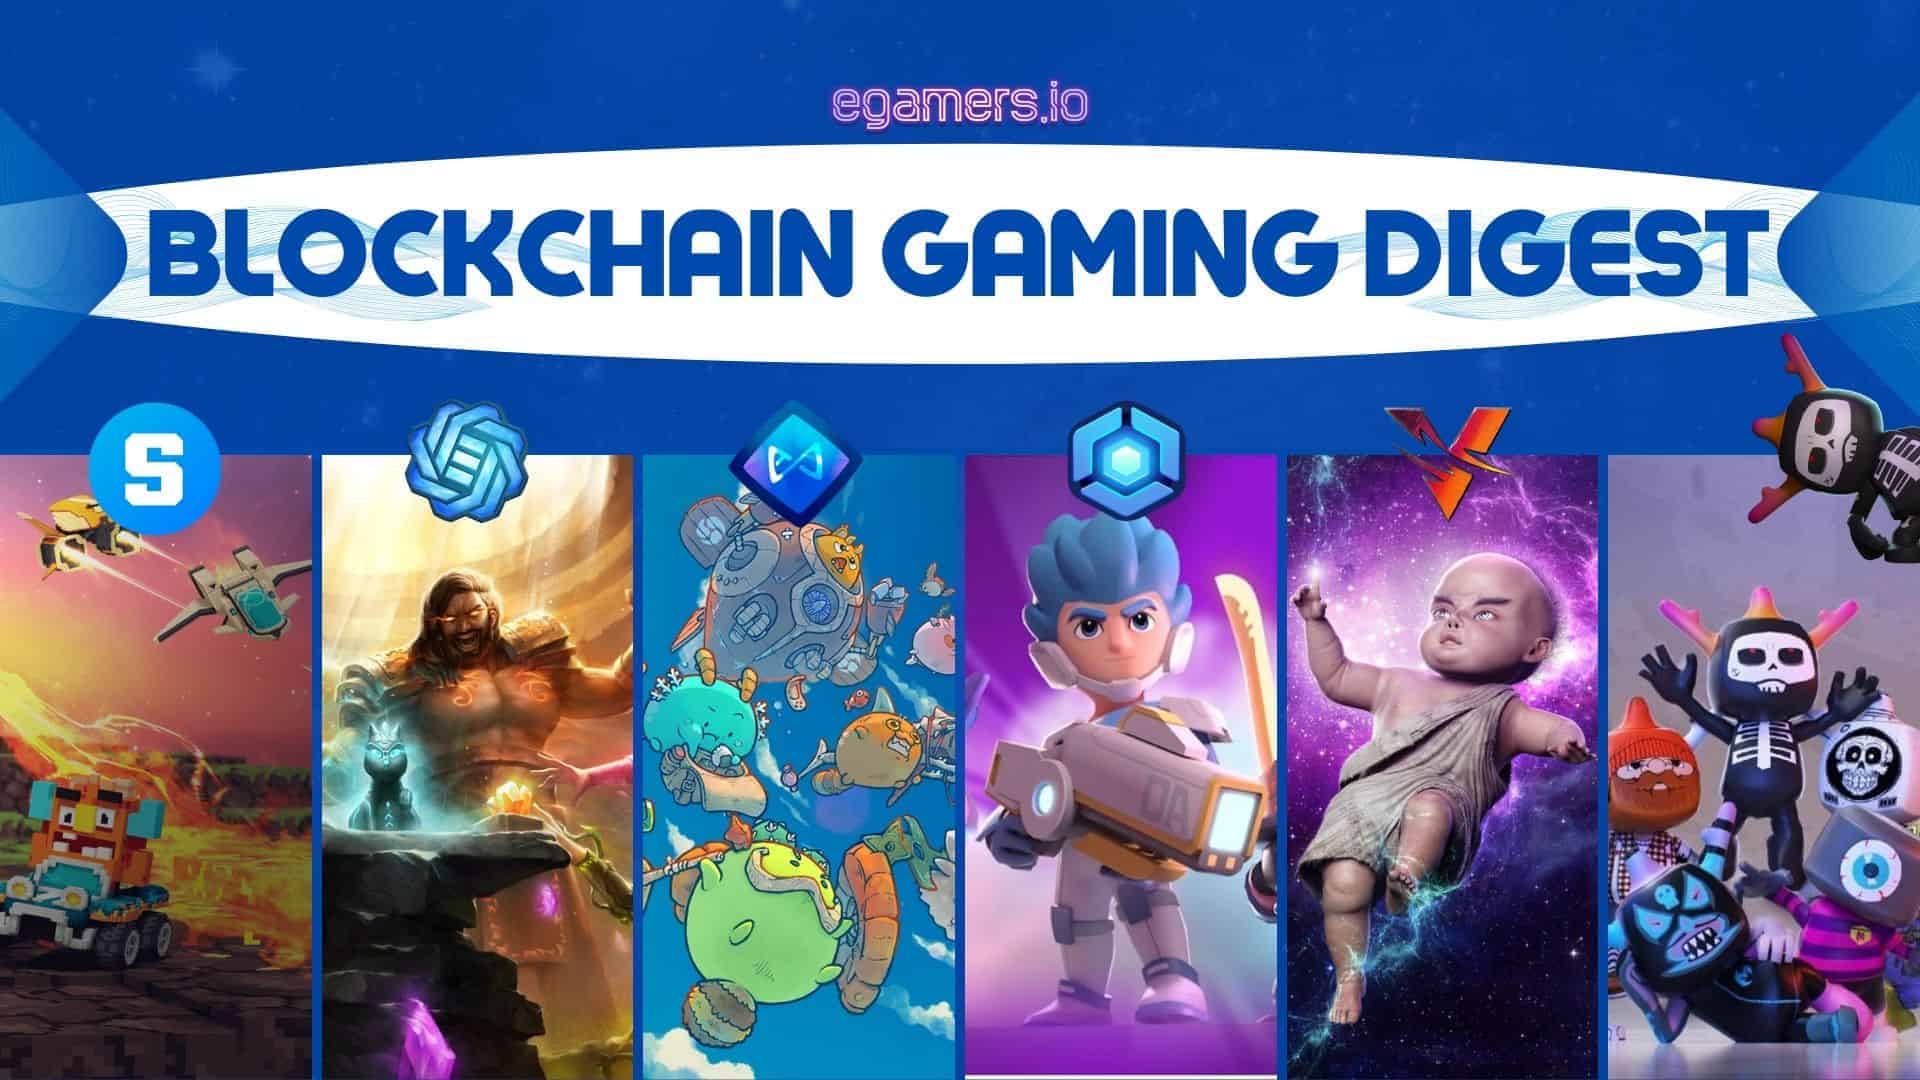 BLOCKCHAIN GAMING DIGEST new TRON Foundation has recently announced a new 0 million fund to incentivize GameFi projects on top of the controversial Chinese blockchain.